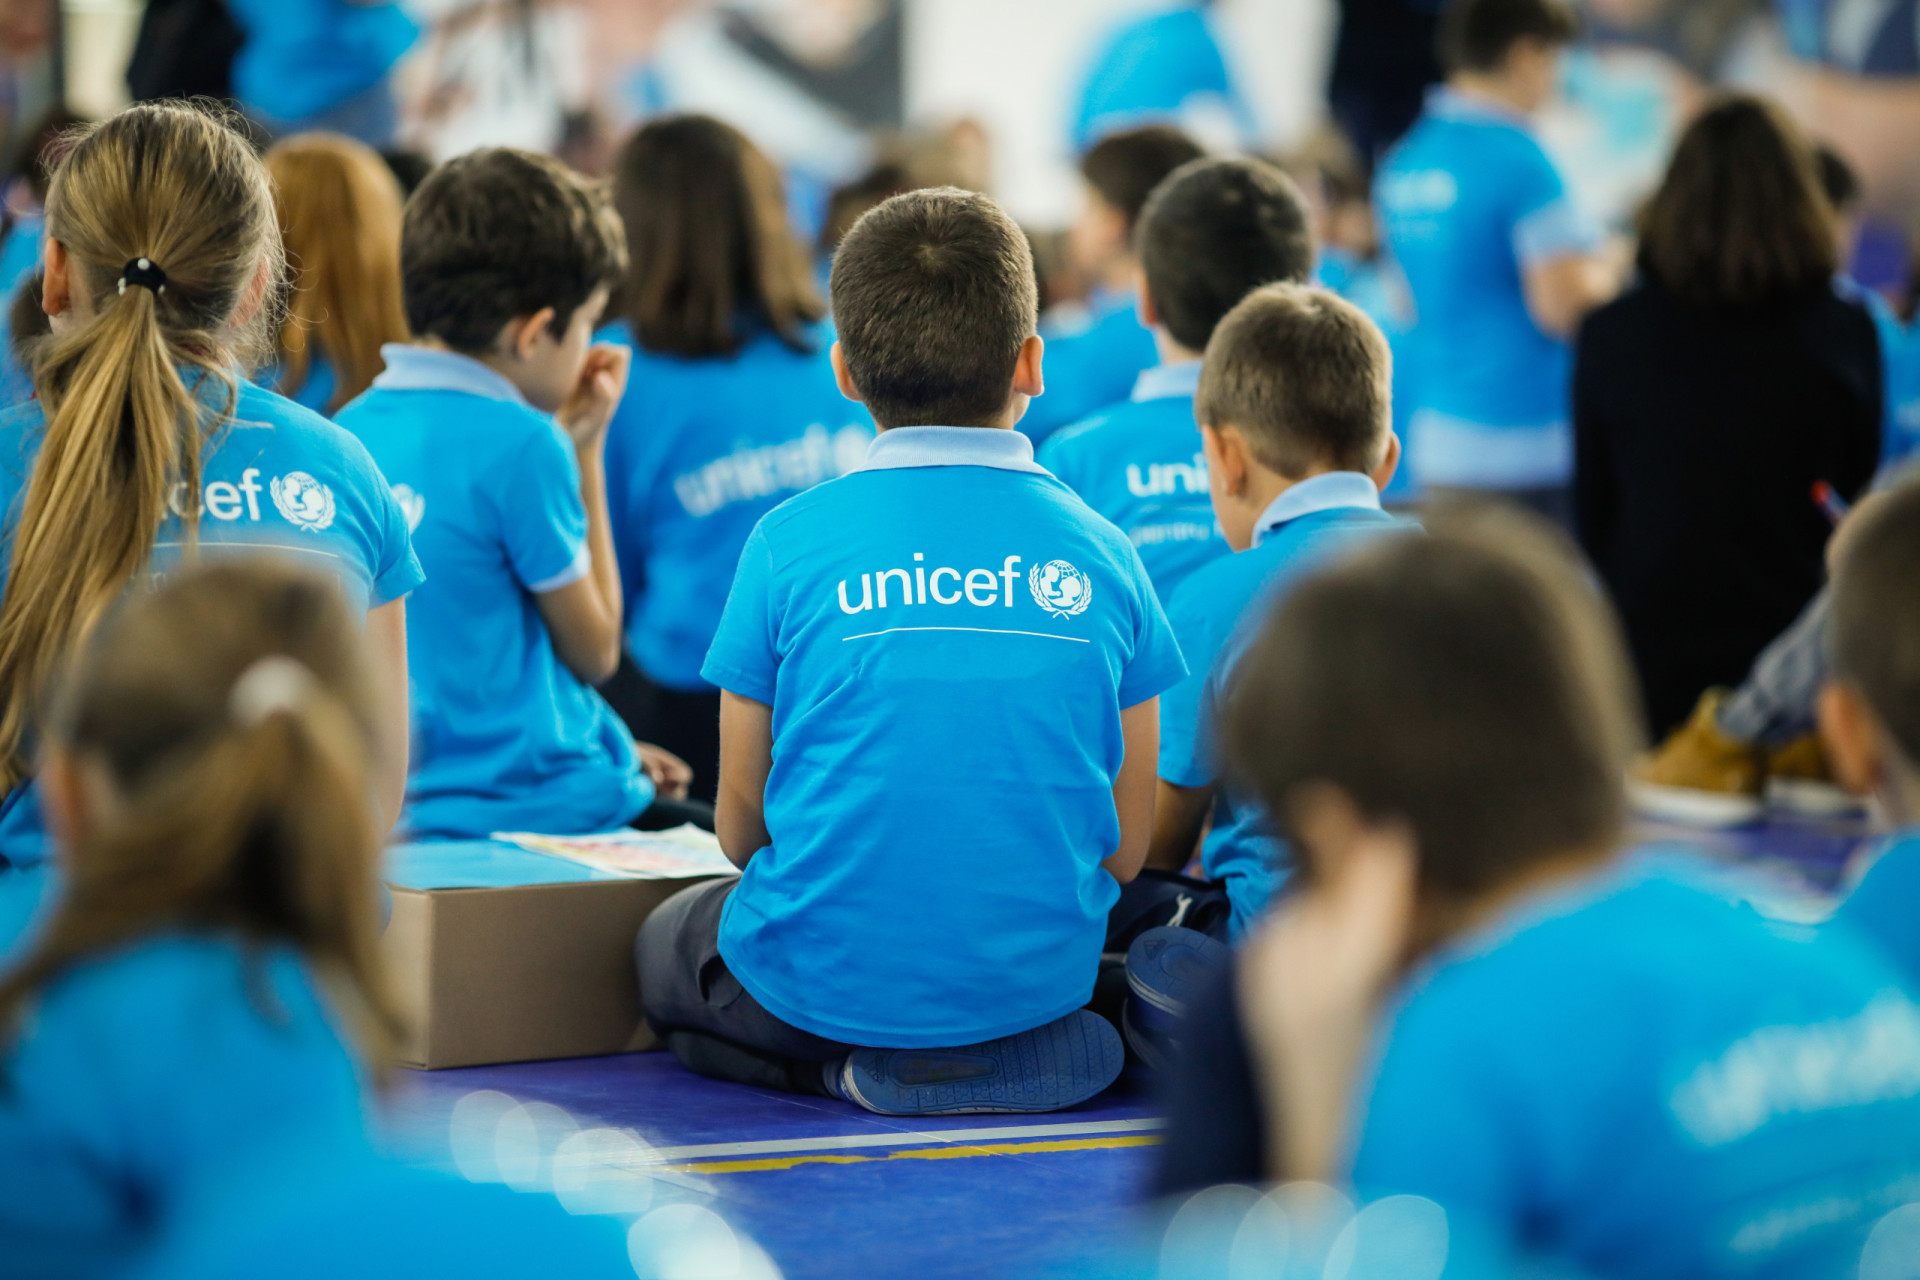 <p>UNICEF is the United Nations International Children’s Emergency Fund. They provide funding to help children in crisis around the world.</p><p>You may also like:<a href="https://www.starsinsider.com/n/386539?utm_source=msn.com&utm_medium=display&utm_campaign=referral_description&utm_content=537630en-en"> Beer brands that Americans can't get enough of</a></p>